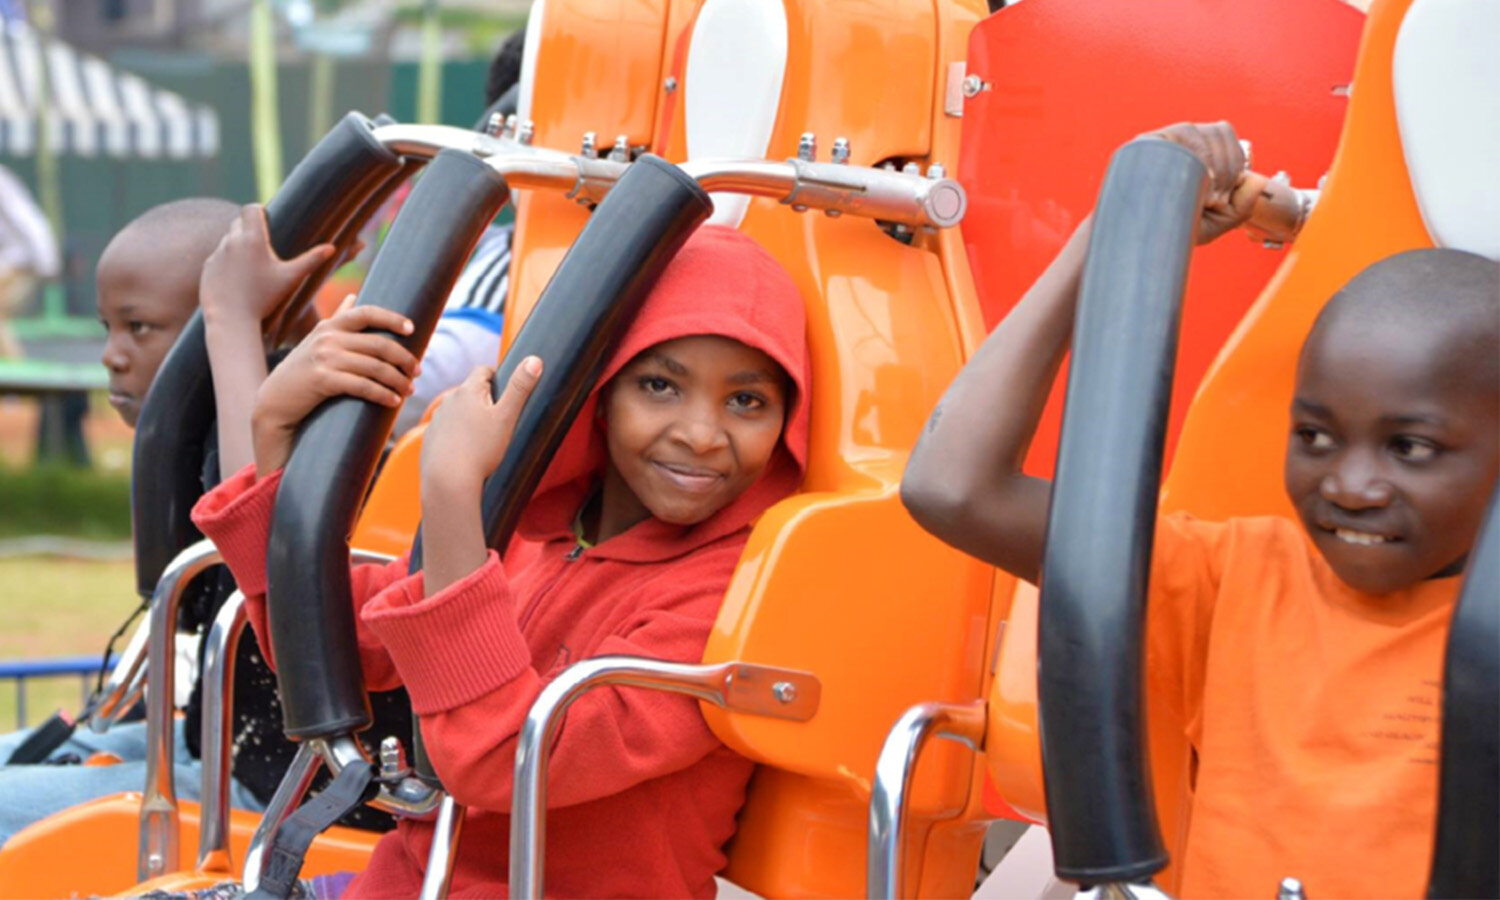   The kids from Morning Star had a blast at the amusement park for Academic Incentive Day.  